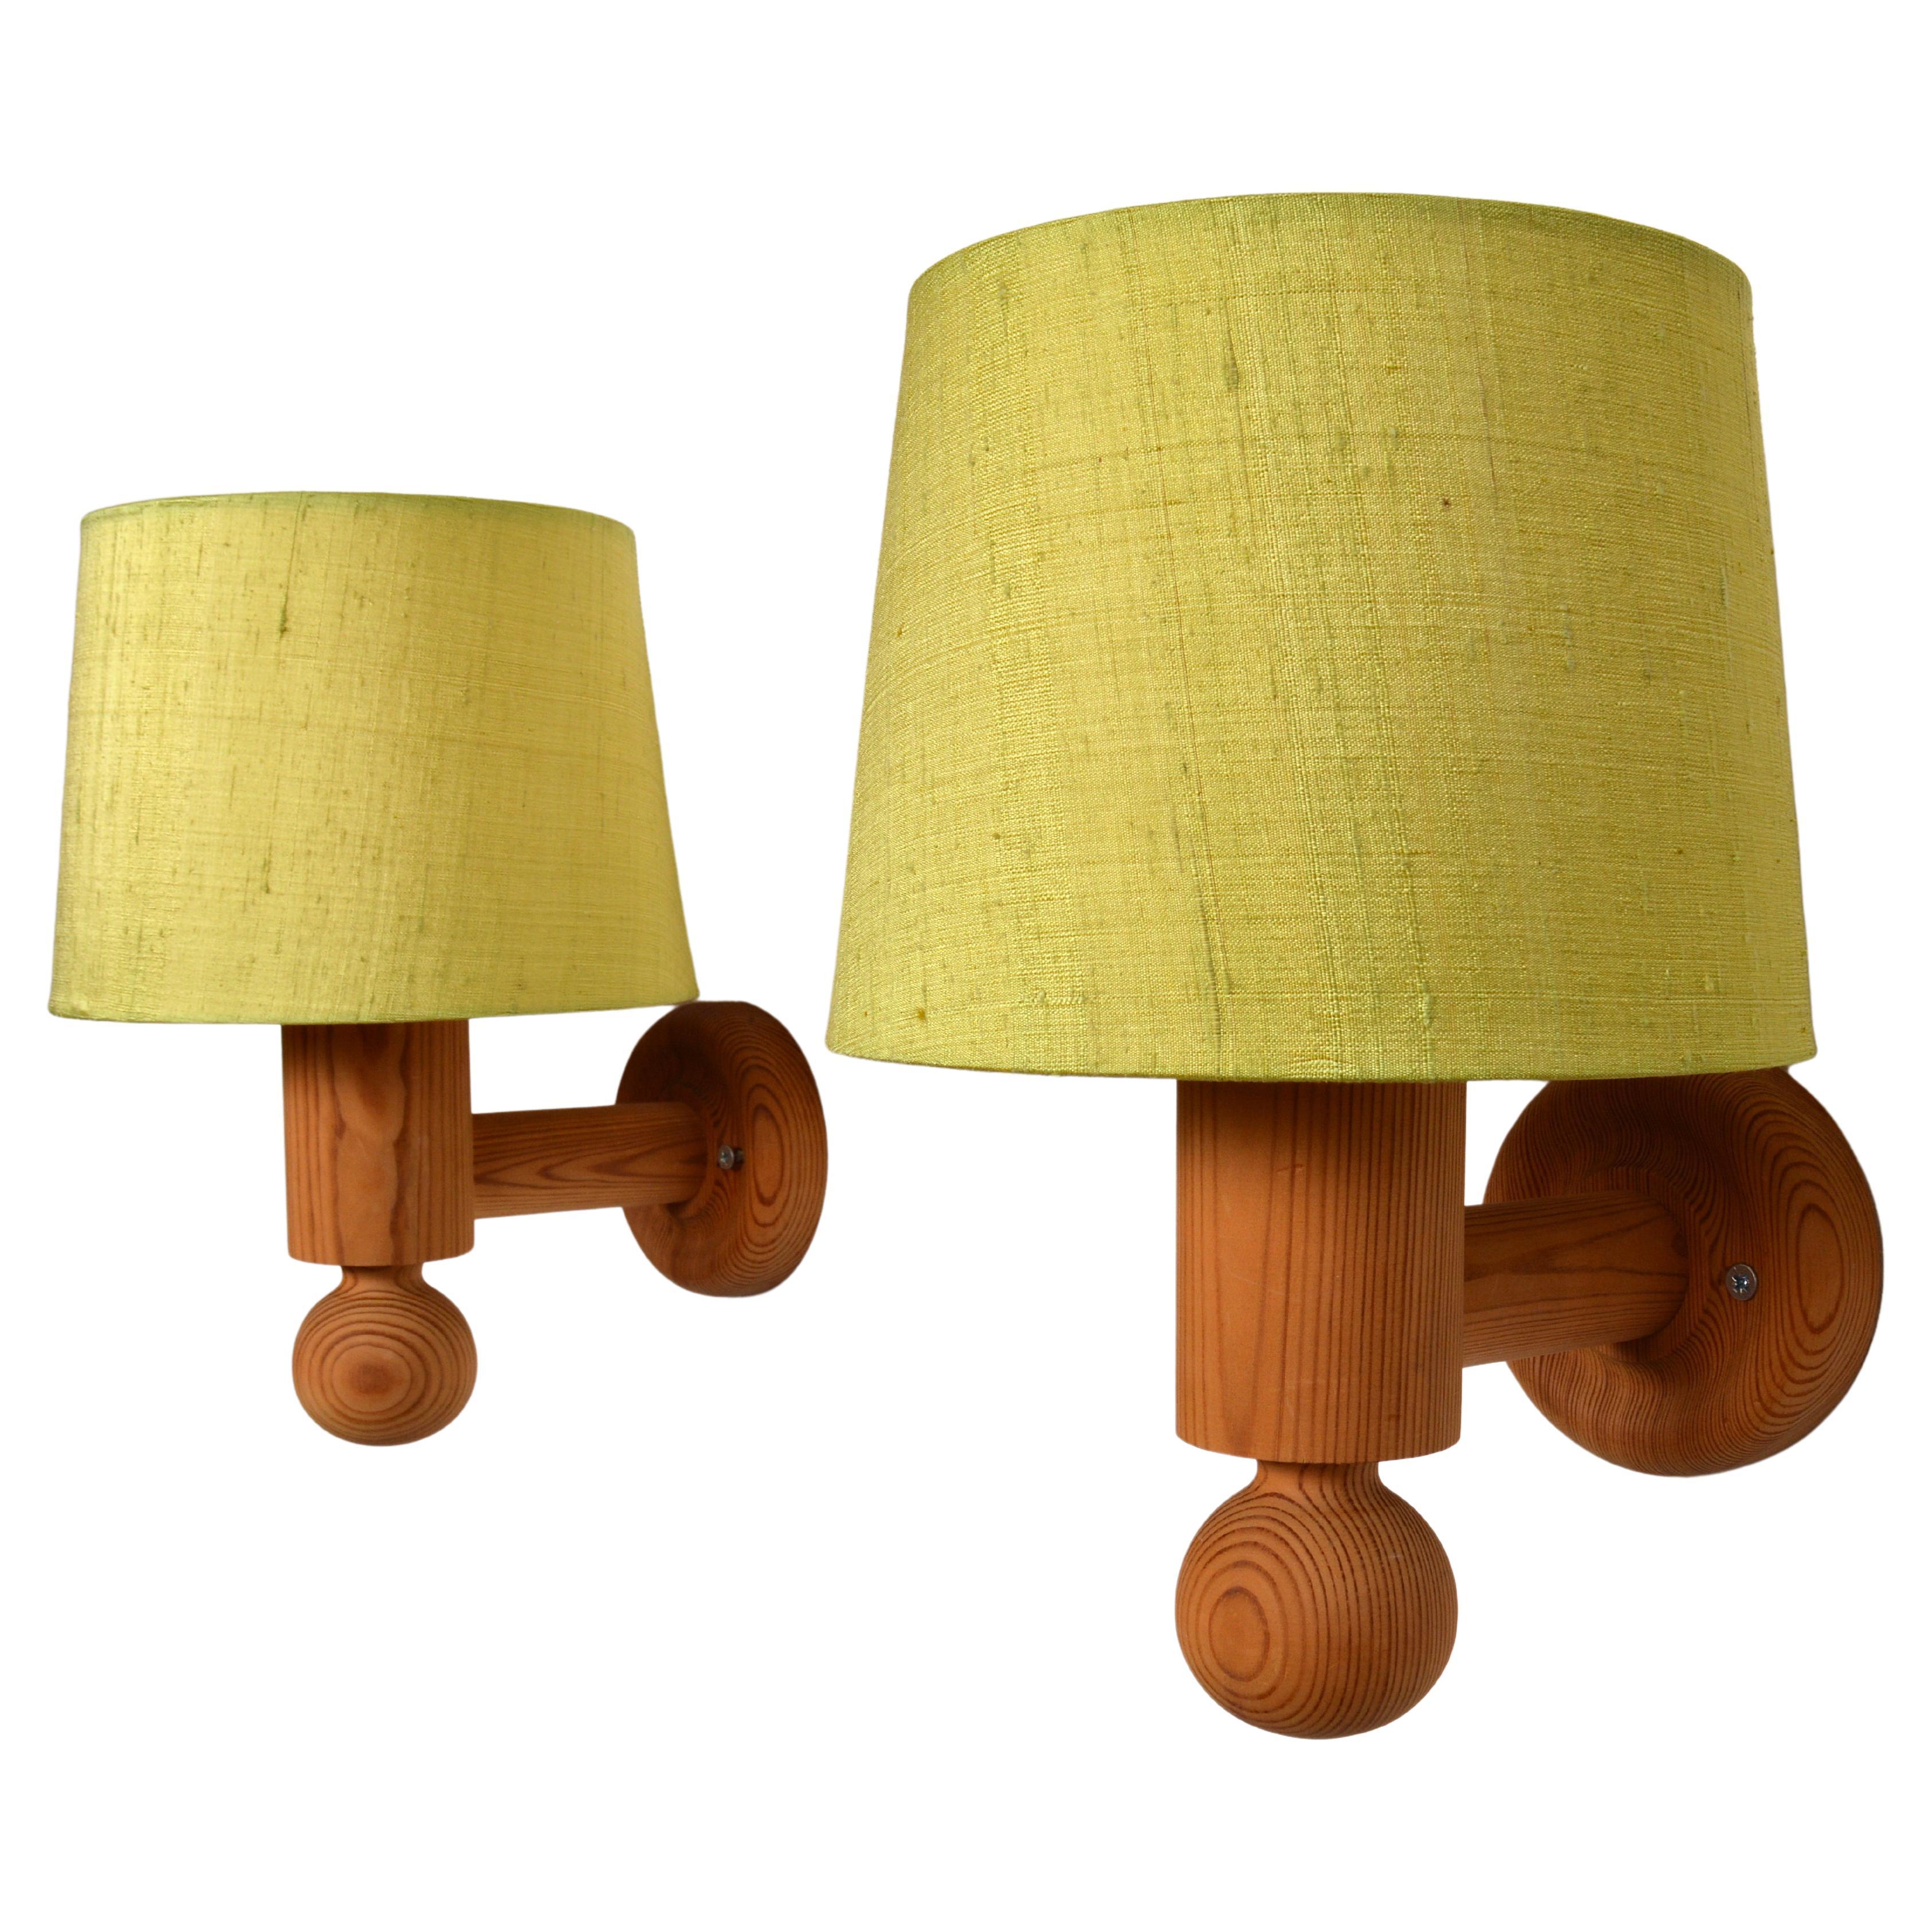 Sconces / Wall Lights in Solid Pine, Luxus Sweden, 1960s For Sale